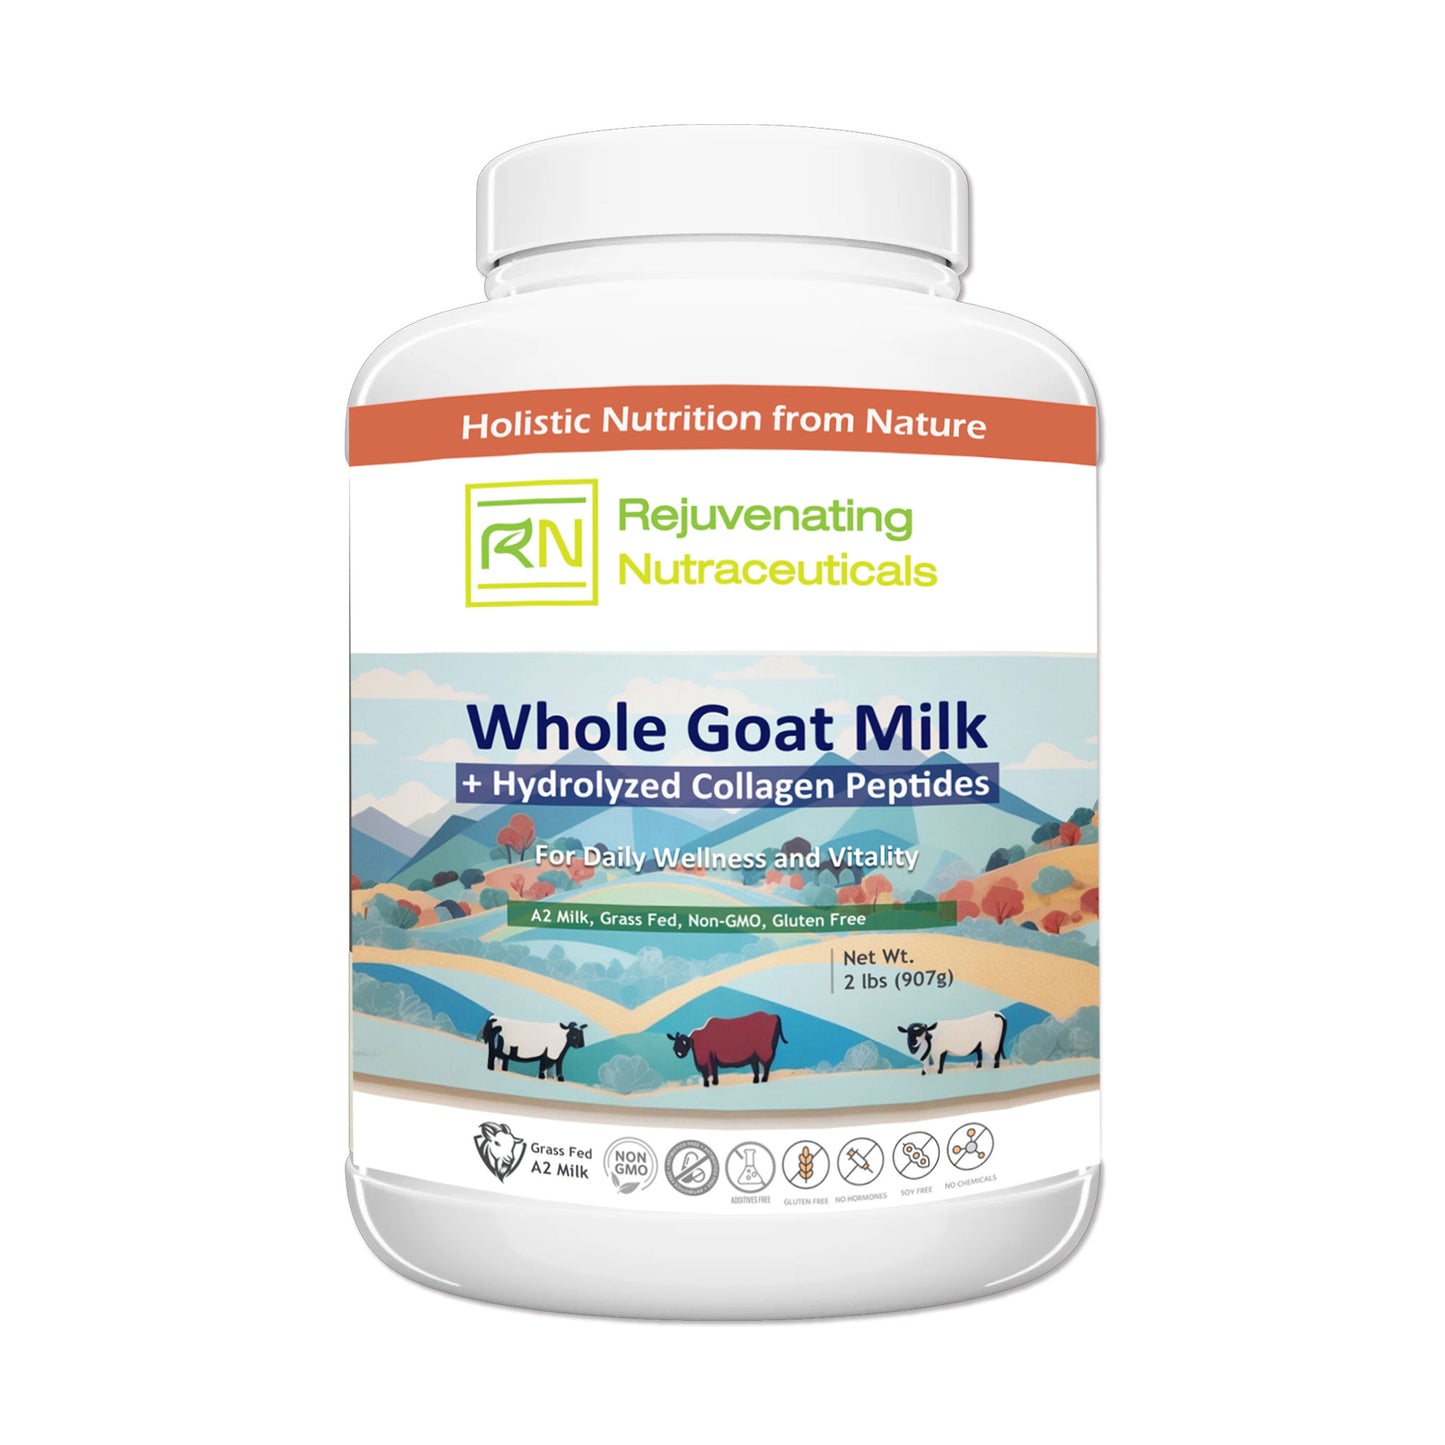 [Grass-Fed] Whole Goat Milk + Hydrolyzed Collagen Peptides